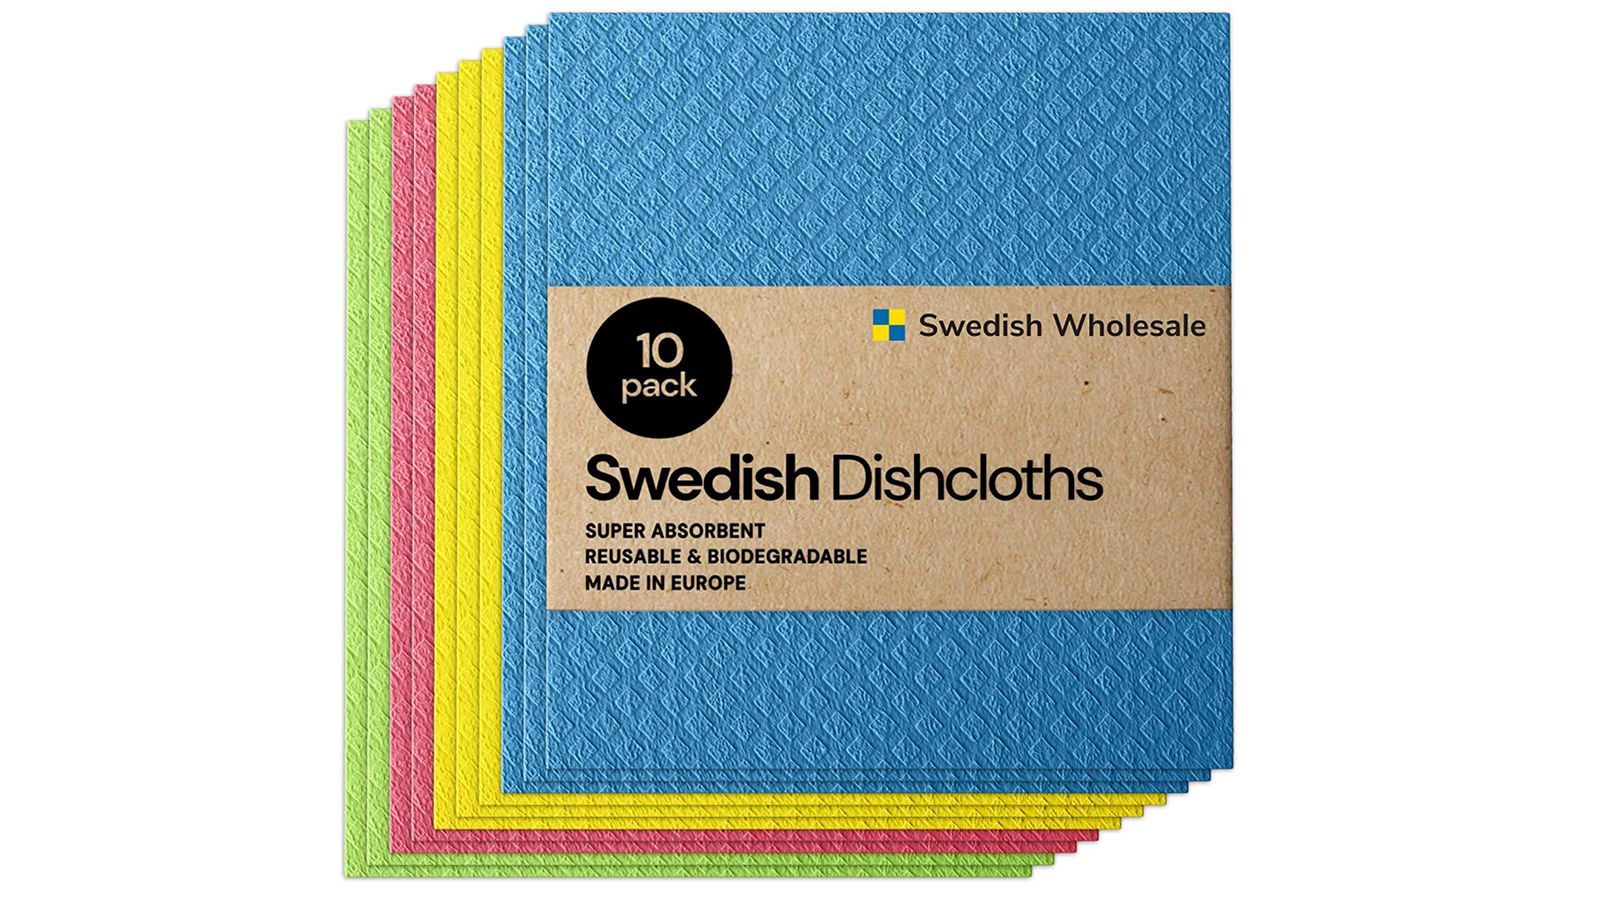 We tried a Redecker's Swedish Dishcloth for a month, here's what